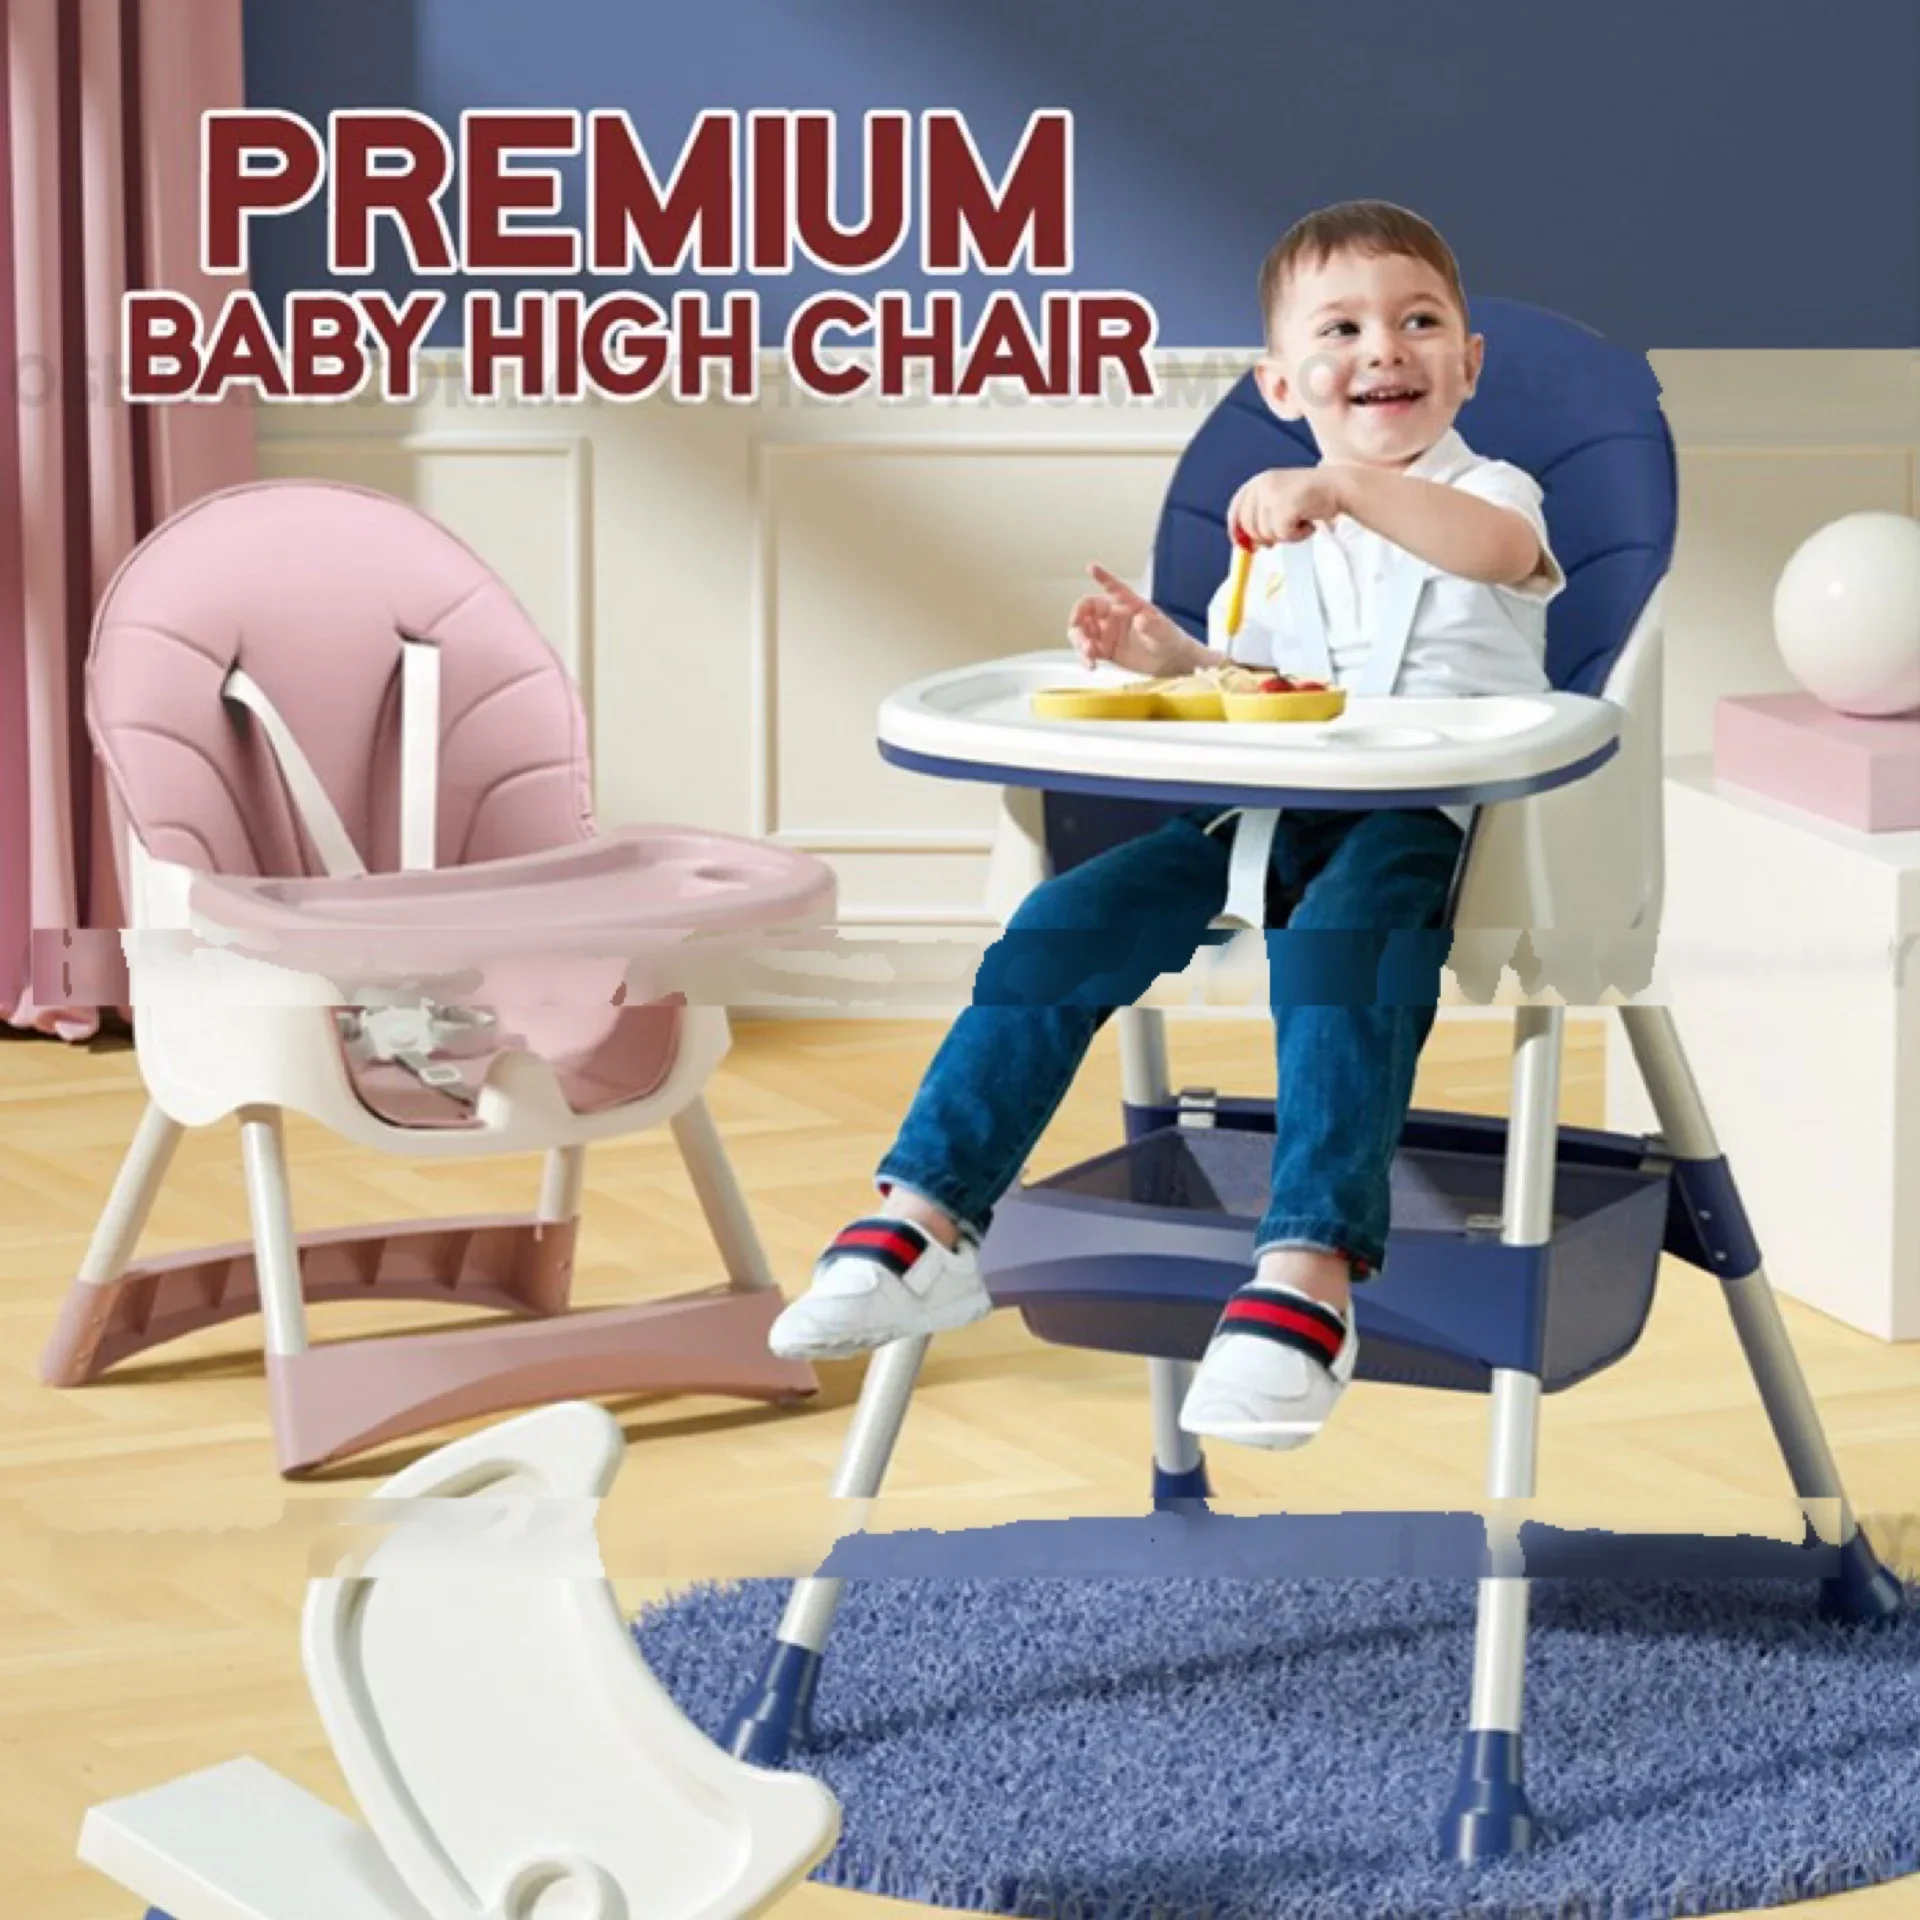 PREMIUM BABY HIGH CHAIR Multi-functional Adjustable Baby Dining chair with Removable Double Plate Kerusi makan Bayi